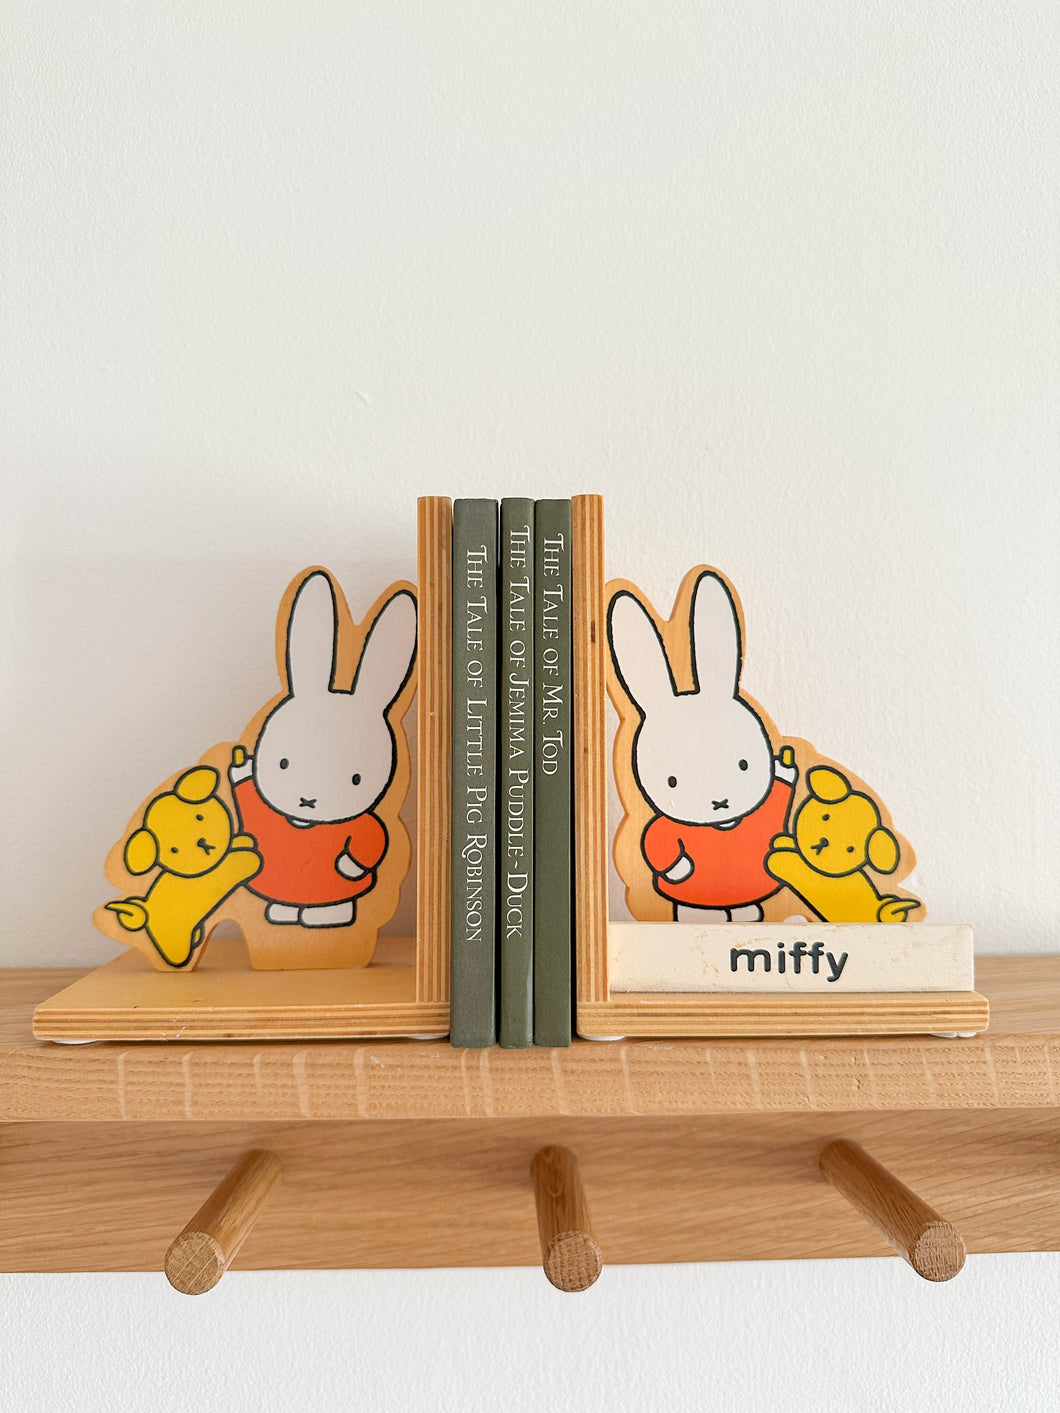 Pair of vintage wooden Miffy rabbit bookends, by Dick Bruna - Moppet